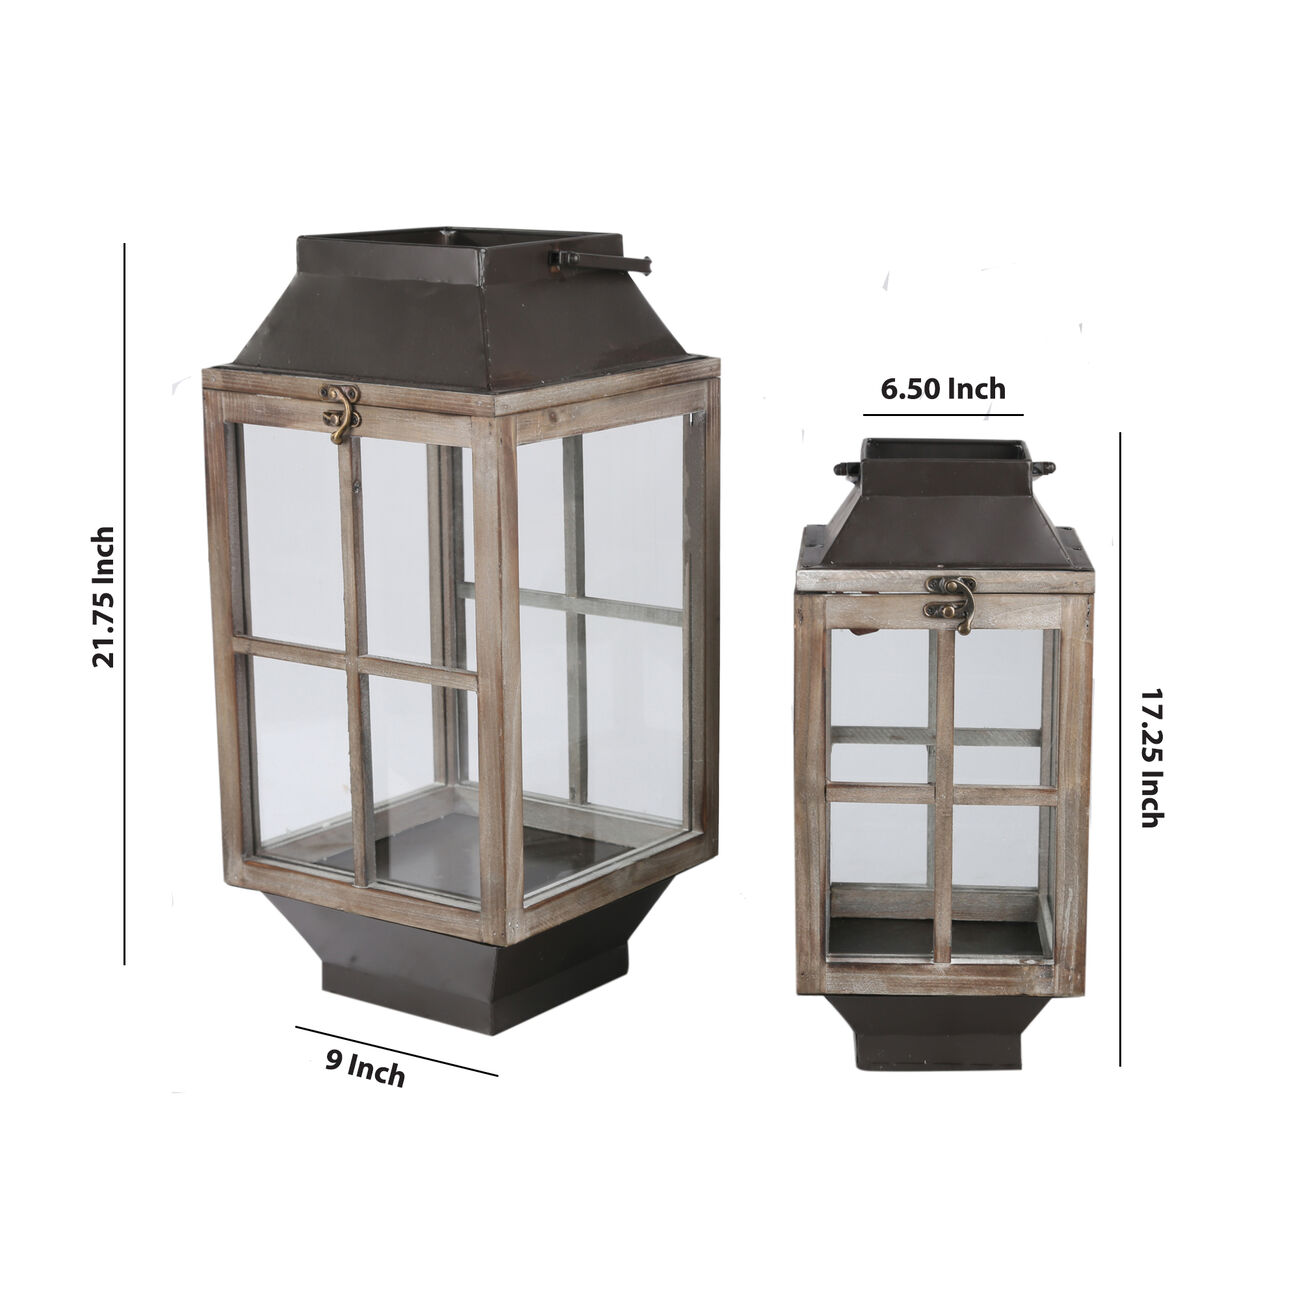 Wood and Metal Lantern with Windowpane Design, Brown and Black, Set of 2